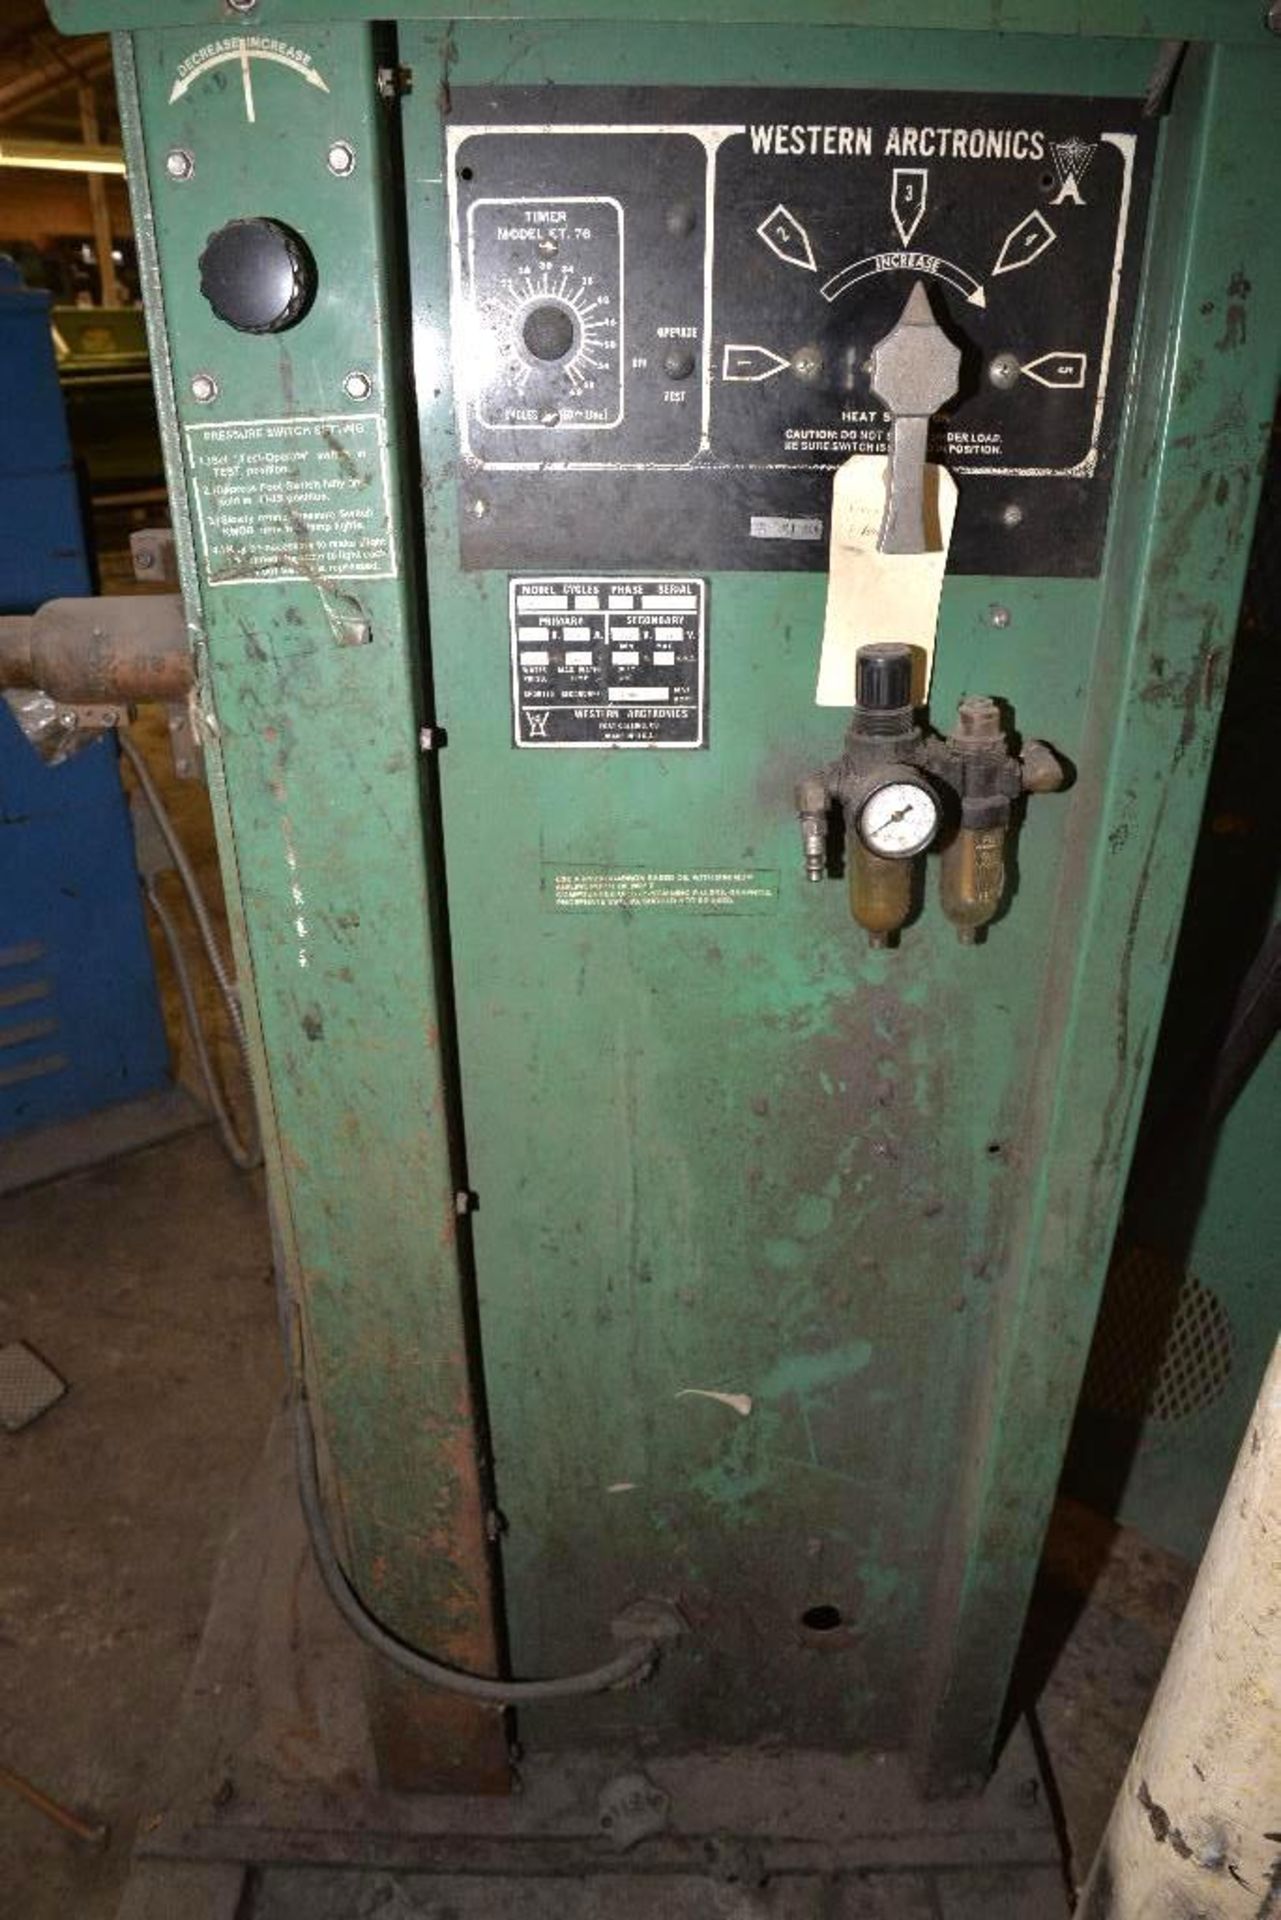 WESTERN ARCTRONICS SPOT WELDER - MD. 30KVA 60 CYCLES - SINGLE PHASE- S/N: FJ 216 - PRIMARY 230V. 100 - Image 2 of 5